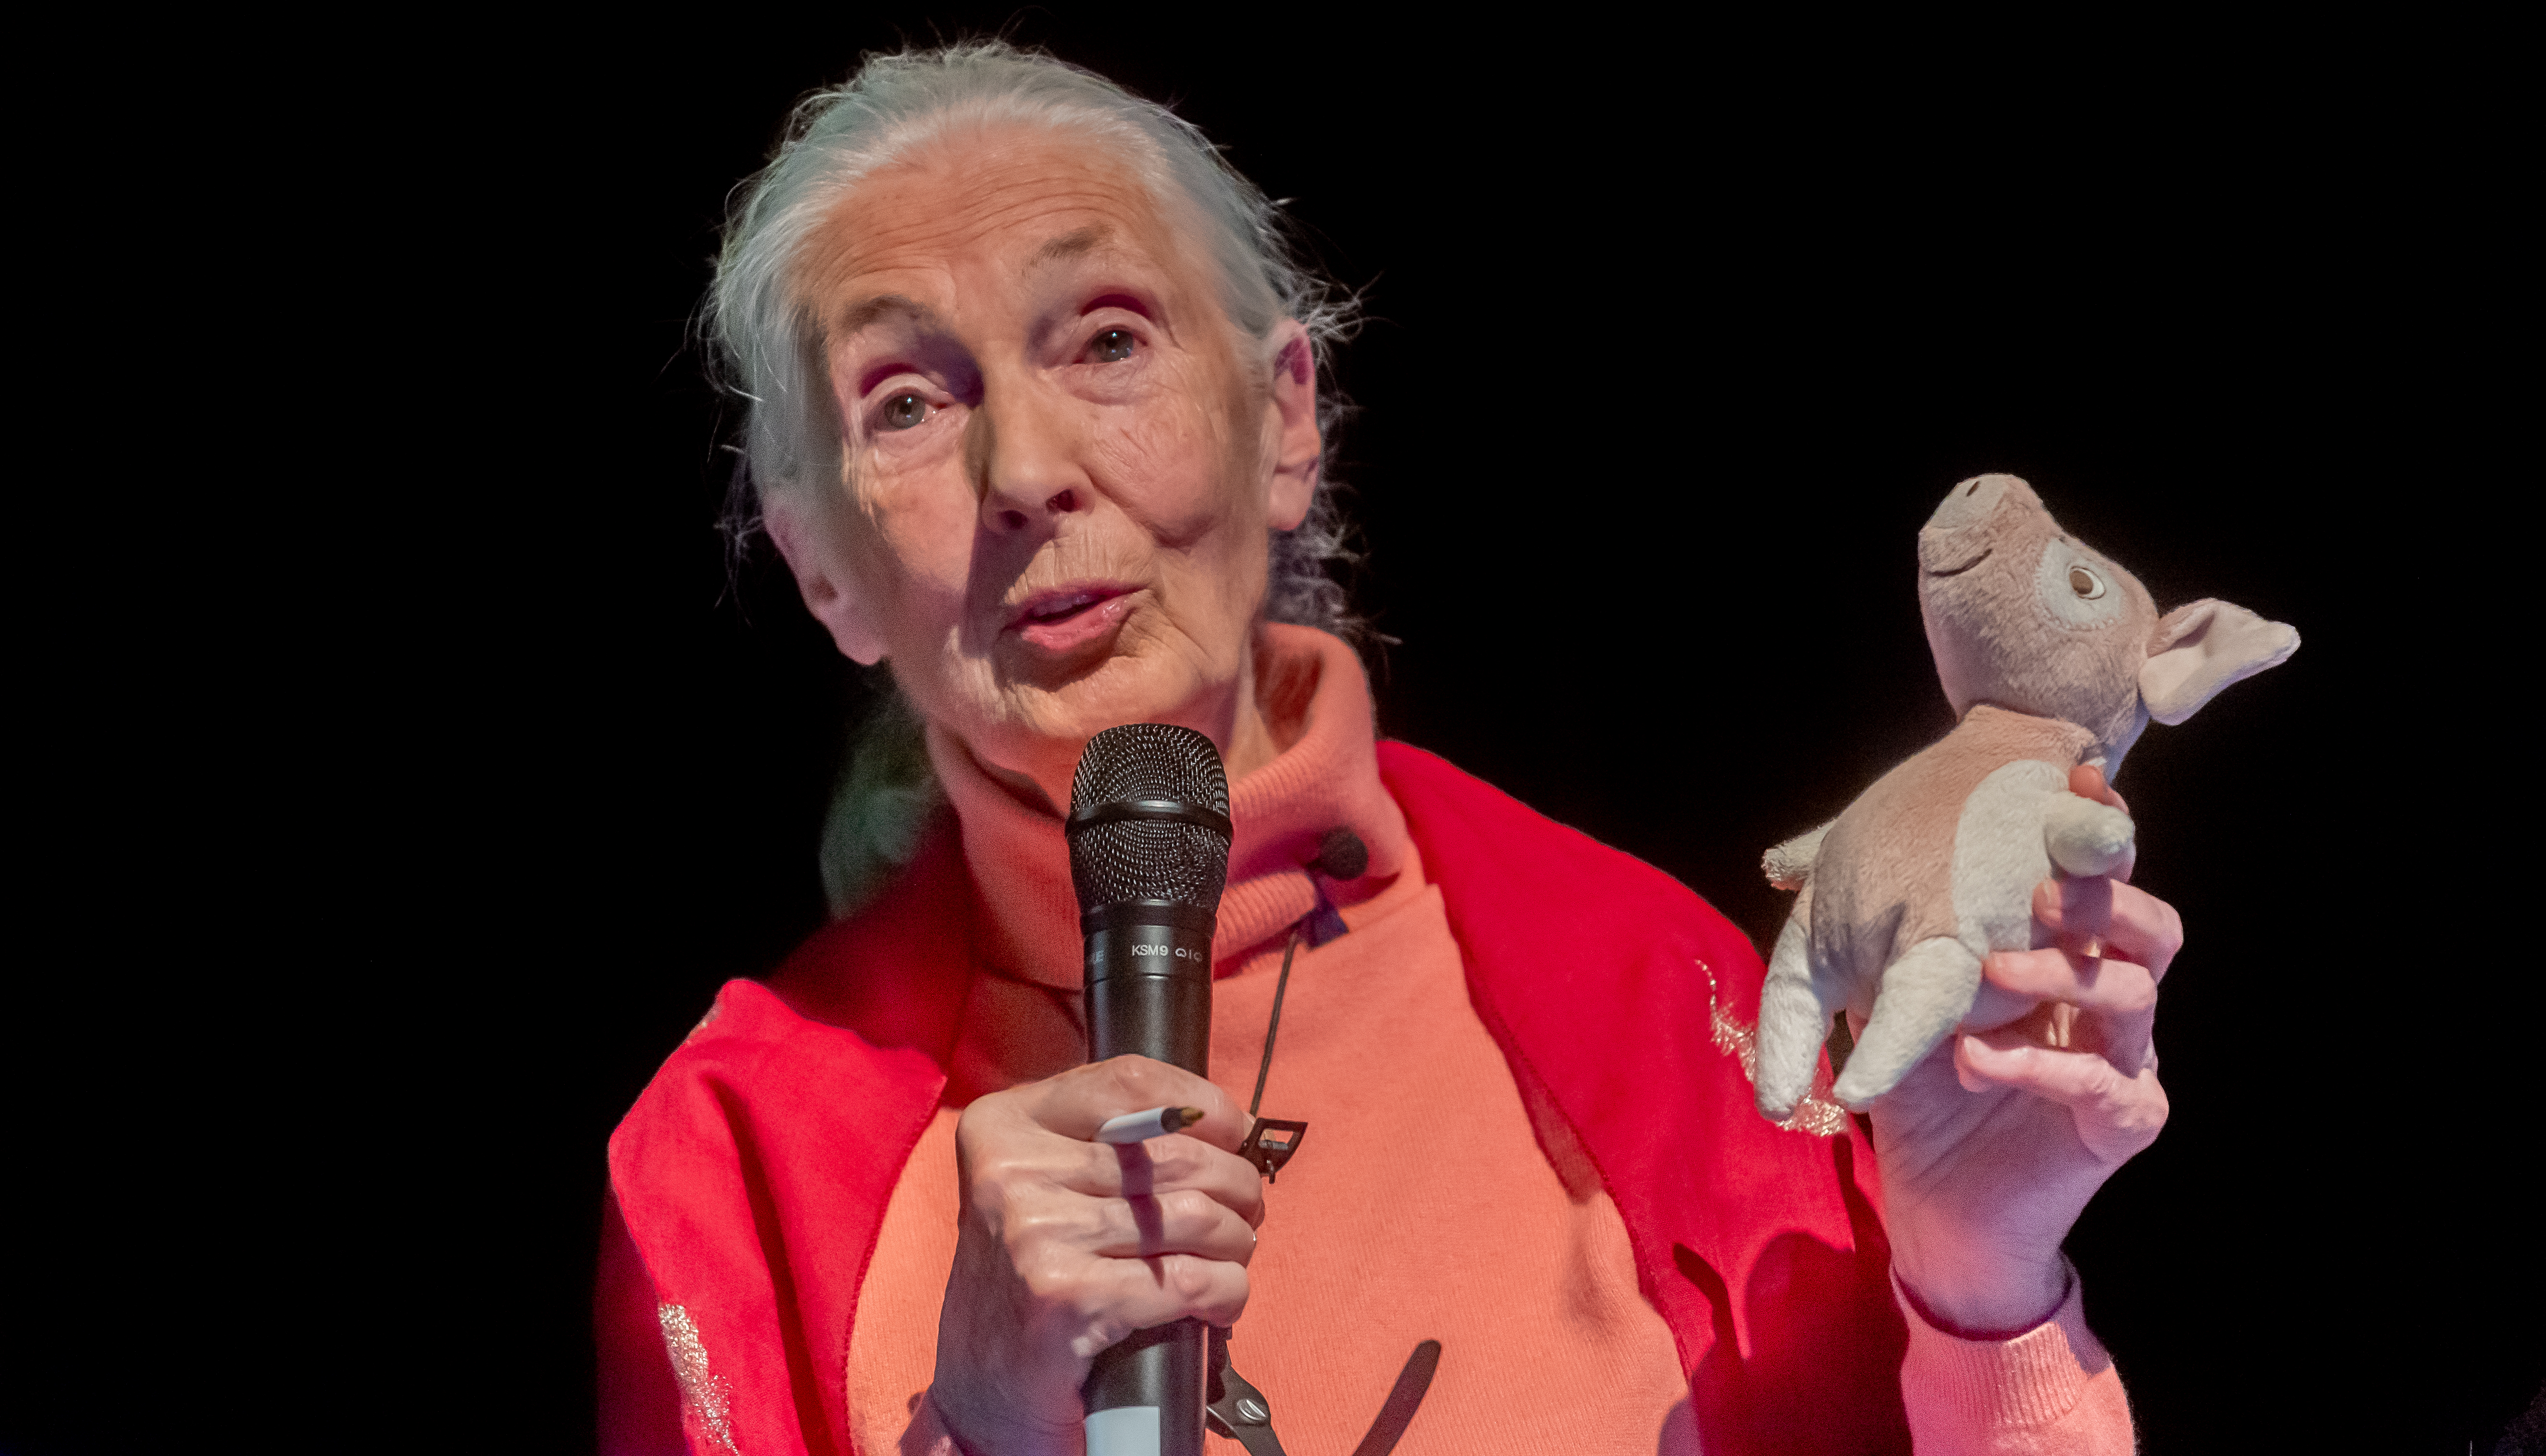 Jane Goodall at an event in November in Baden.